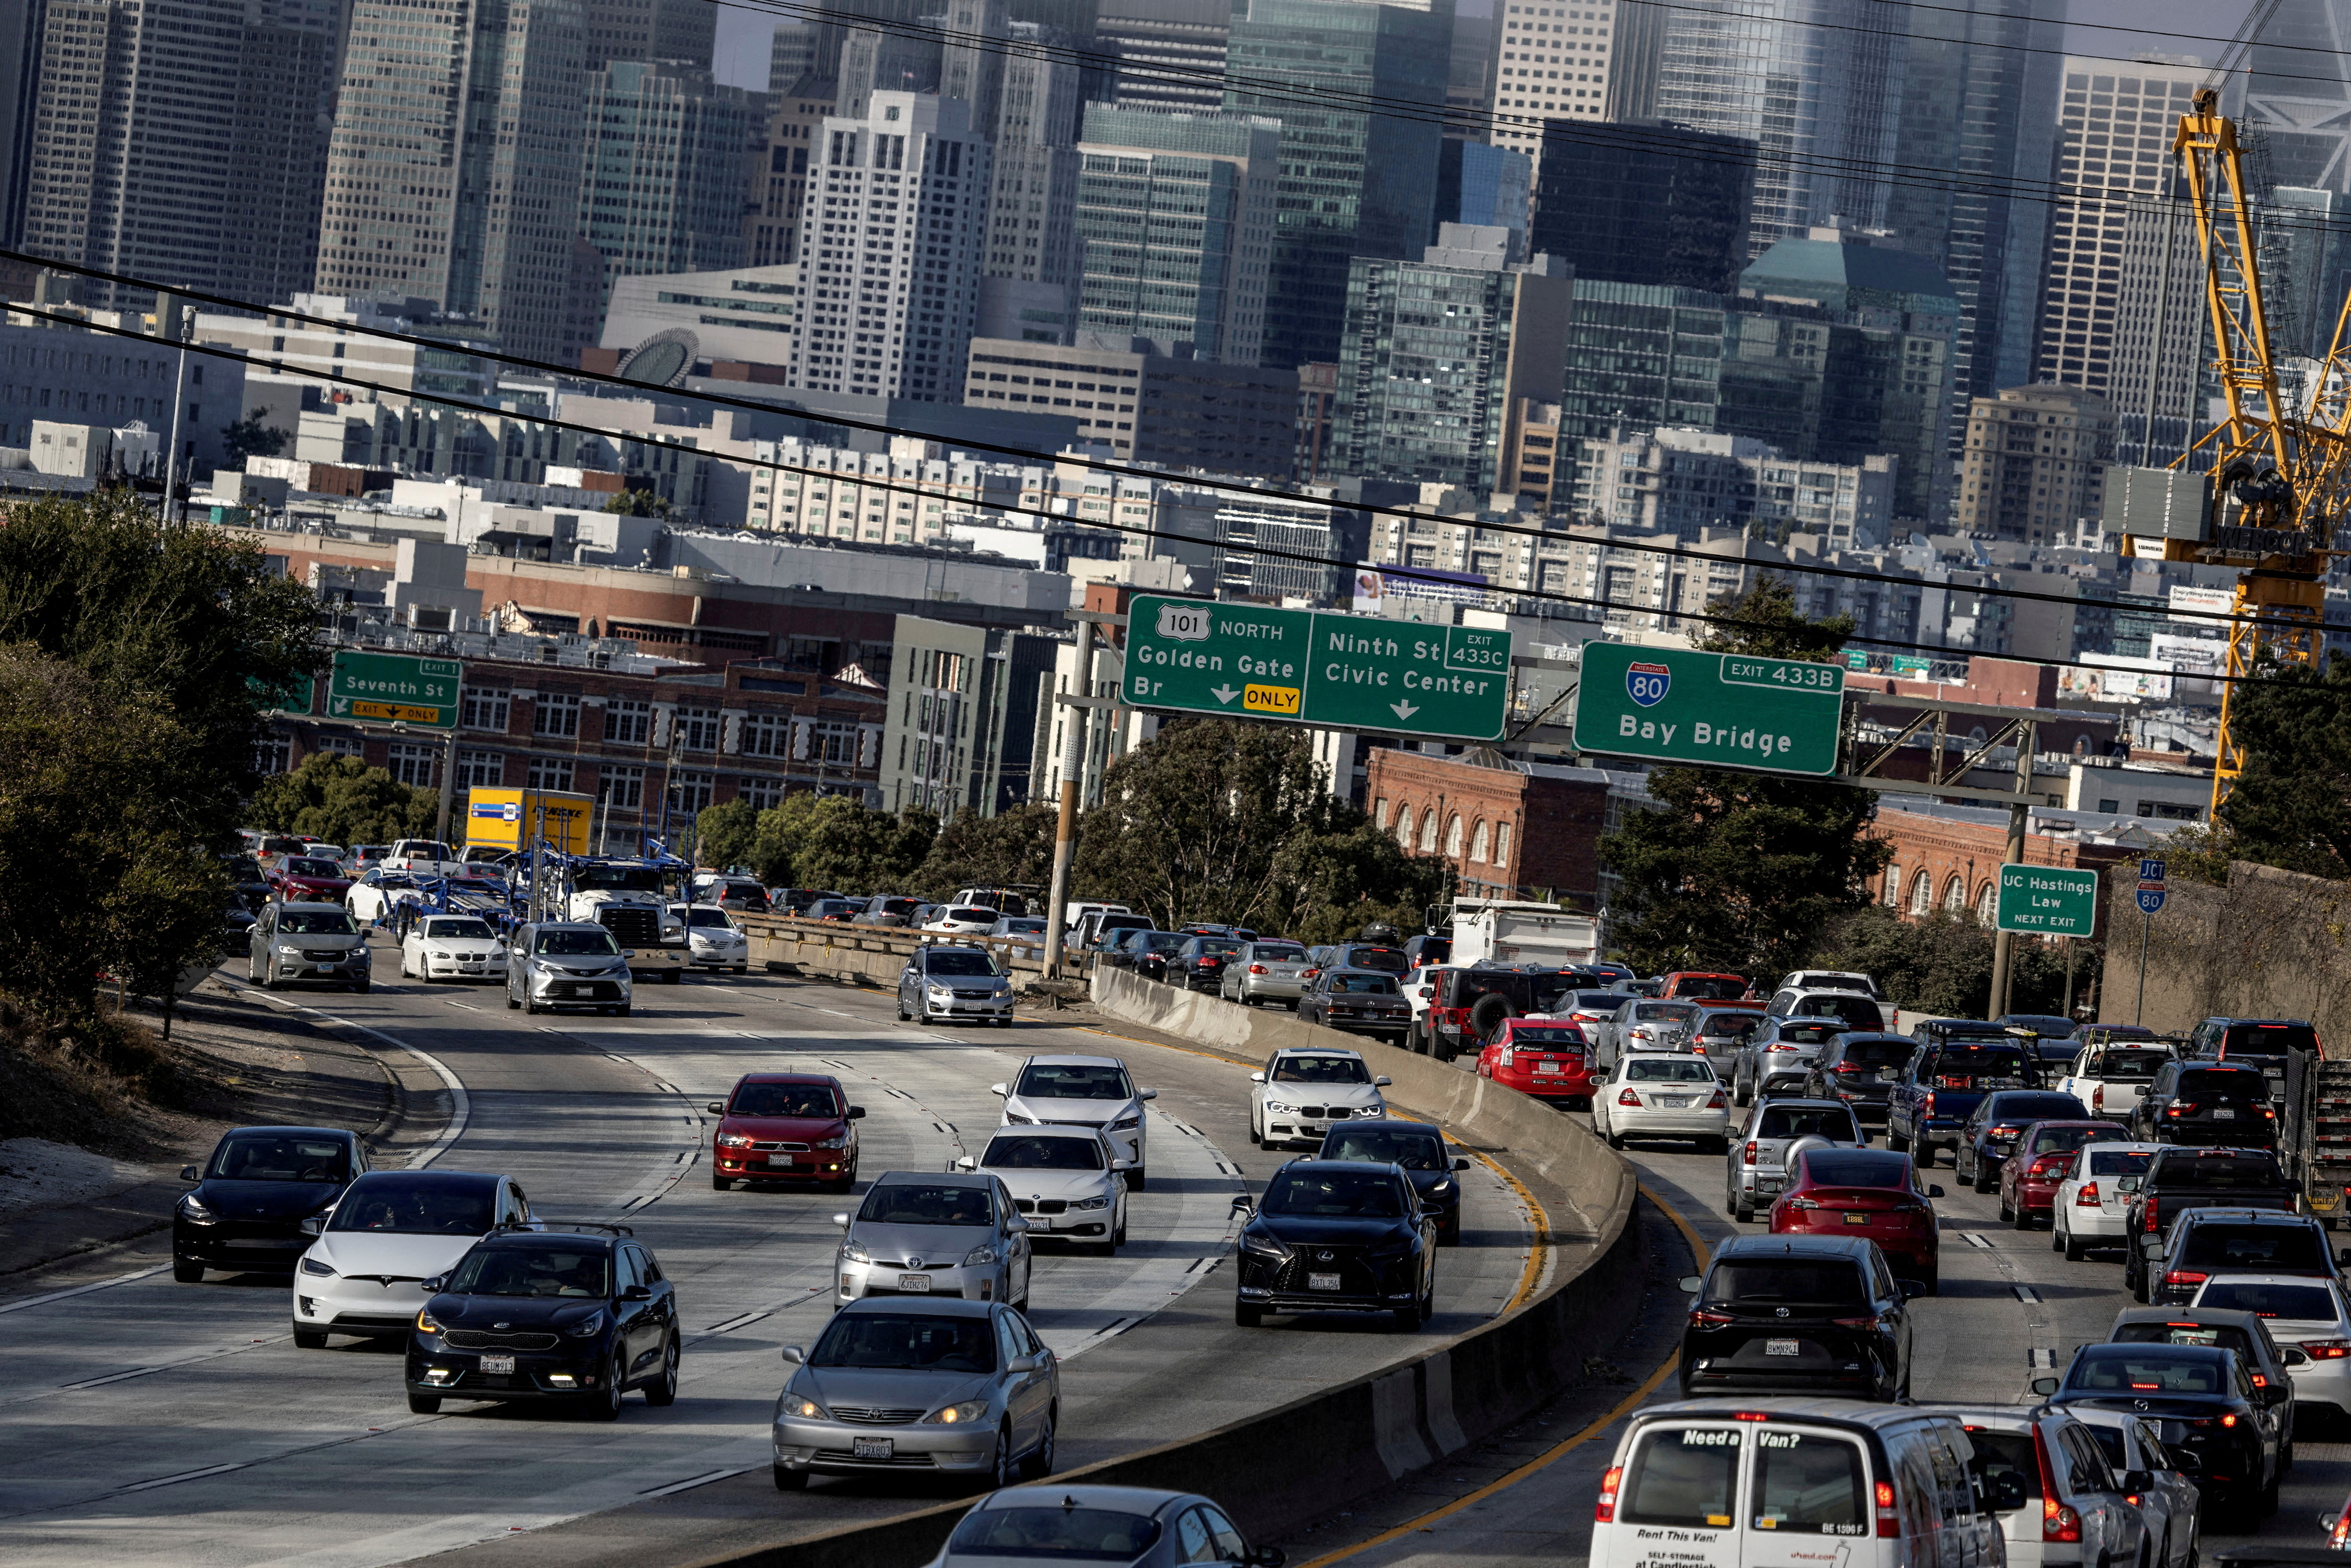 A view of cars on the road during rush hour in San Francisco